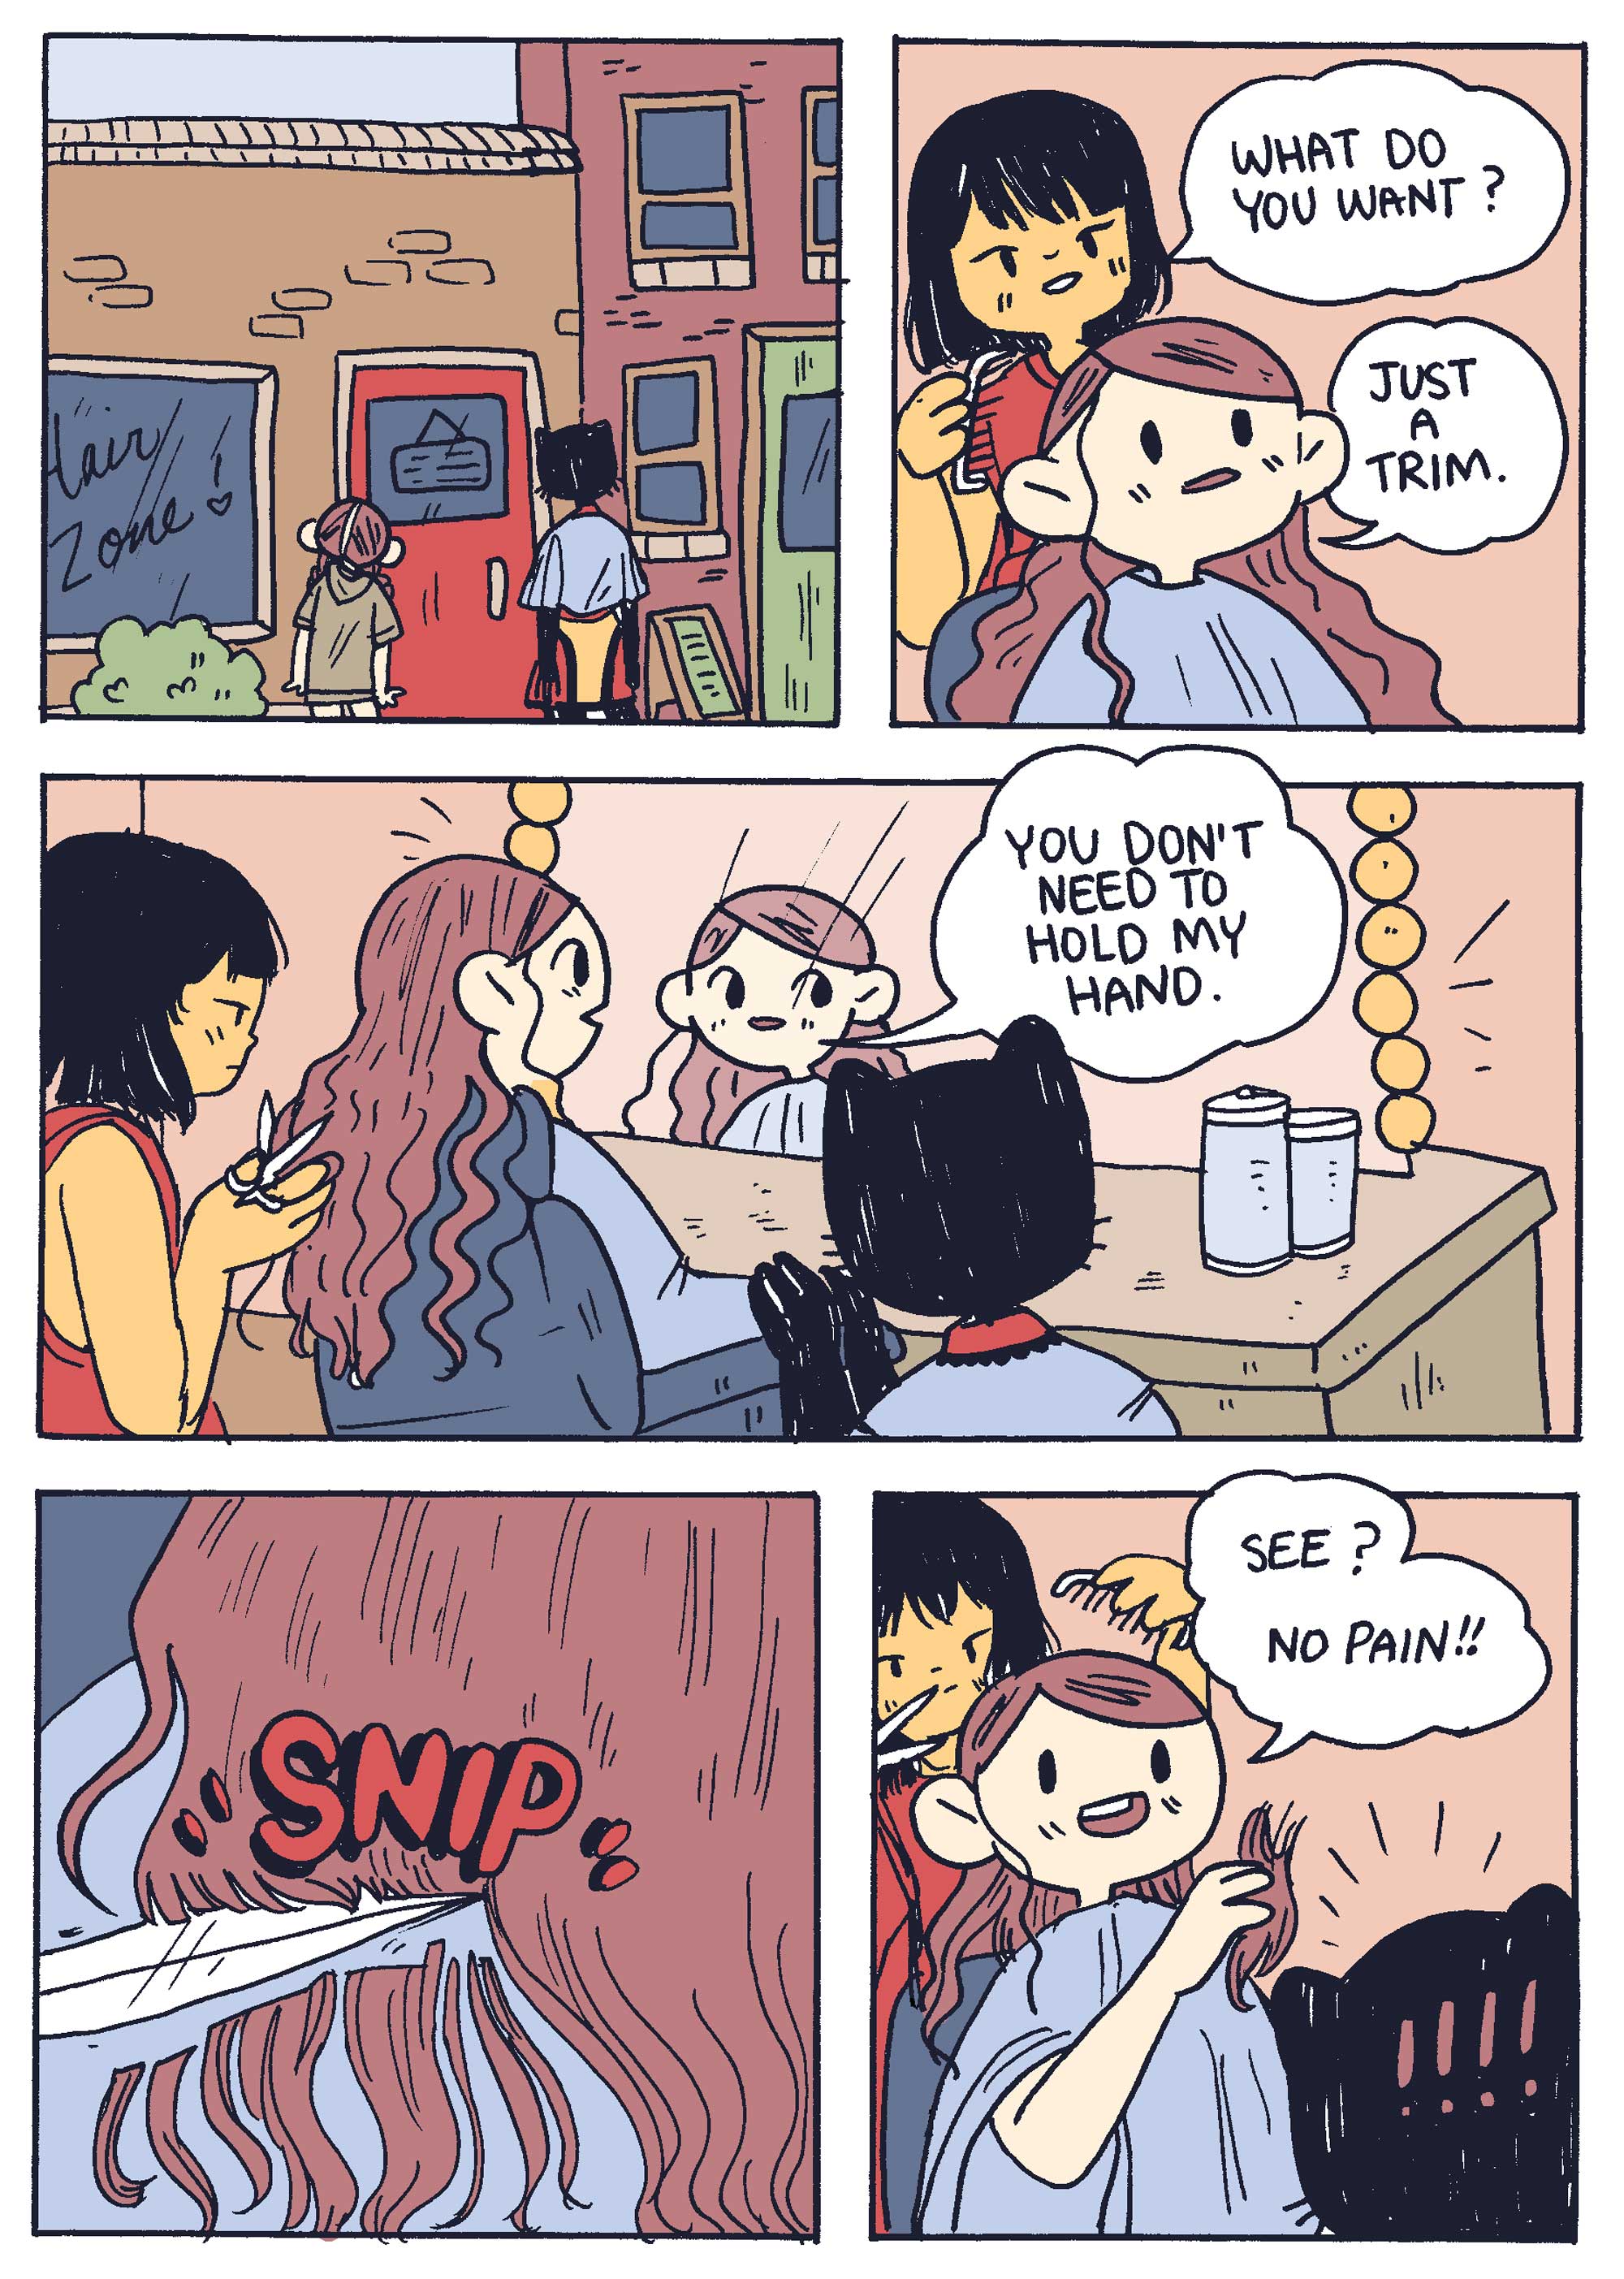 Catboy's Haircut,' Today's Comic by Benji Nate